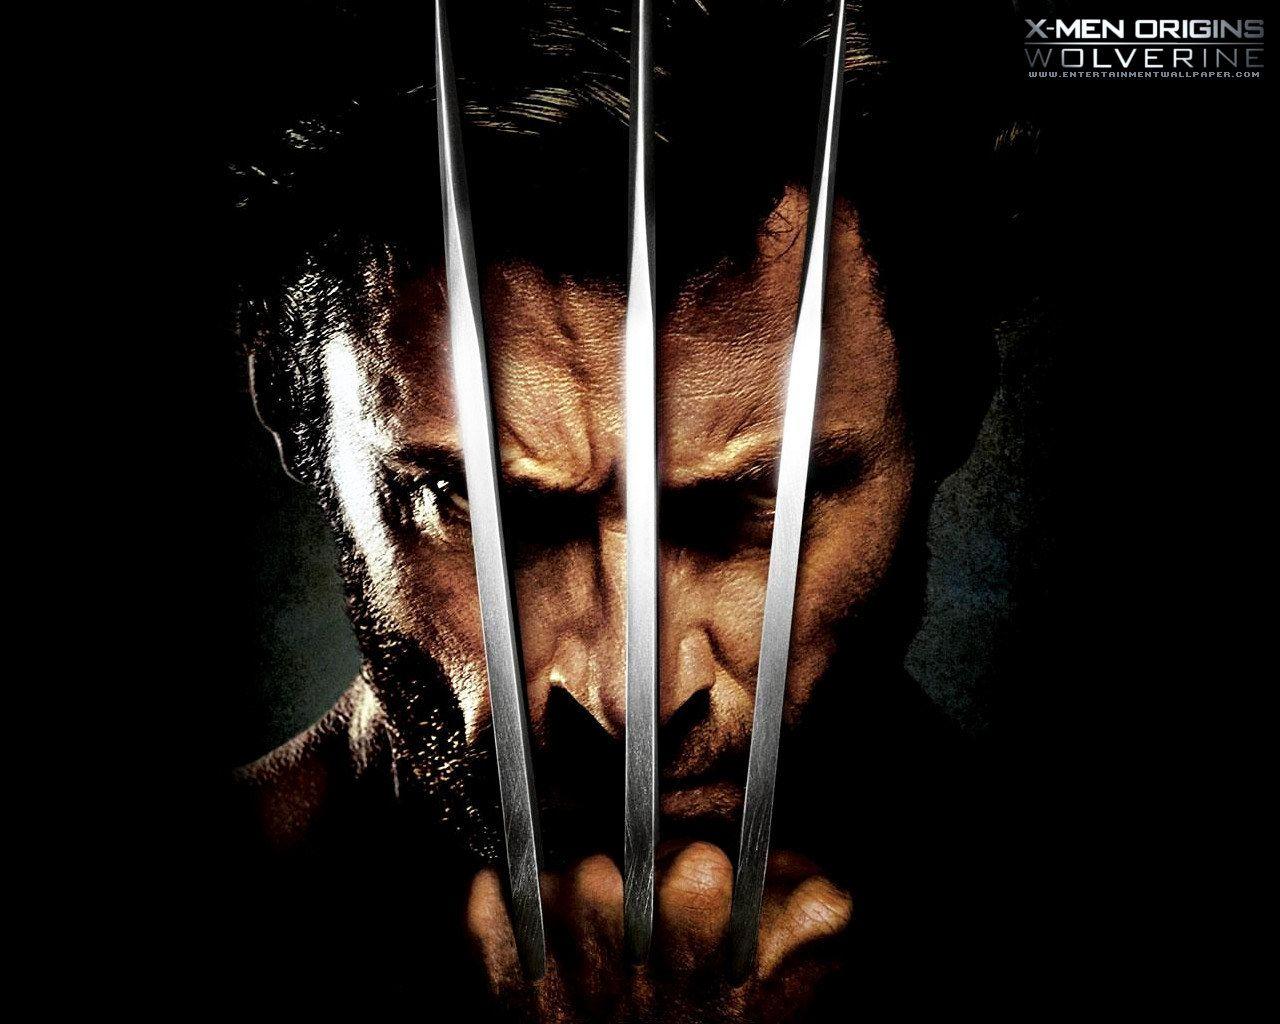 Download free wolverine wallpaper for your mobile phone most 1280x1024